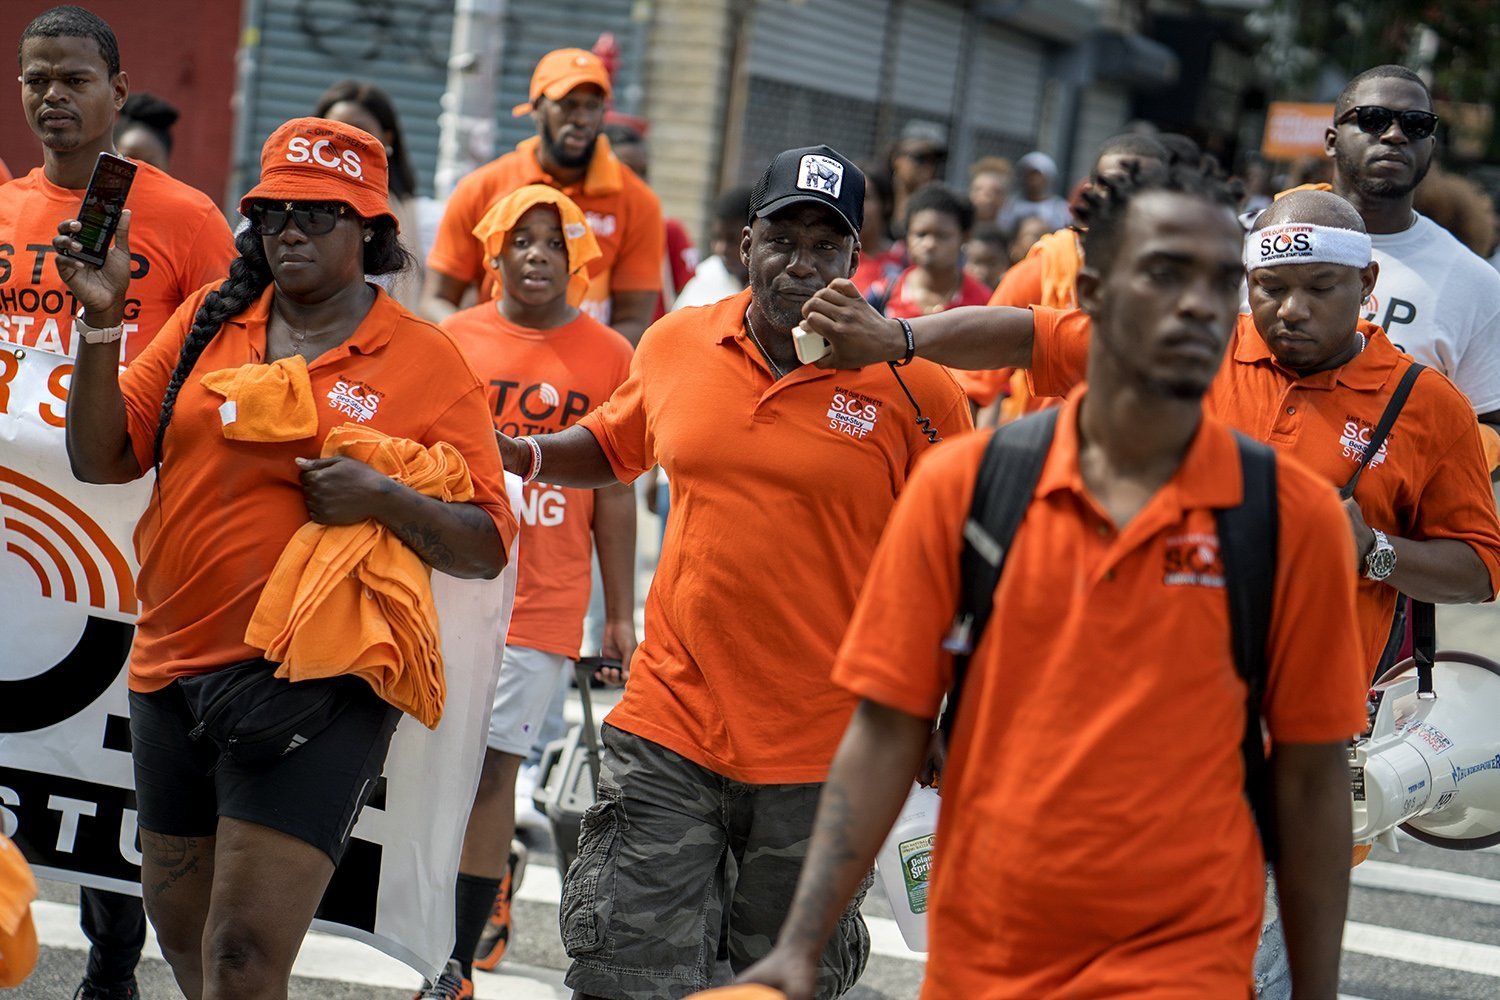 S.O.S. organizer Joseph Simmon (center) leading the march across the streets of Bed-Stuy. (Photo by Tsubasa Berg)